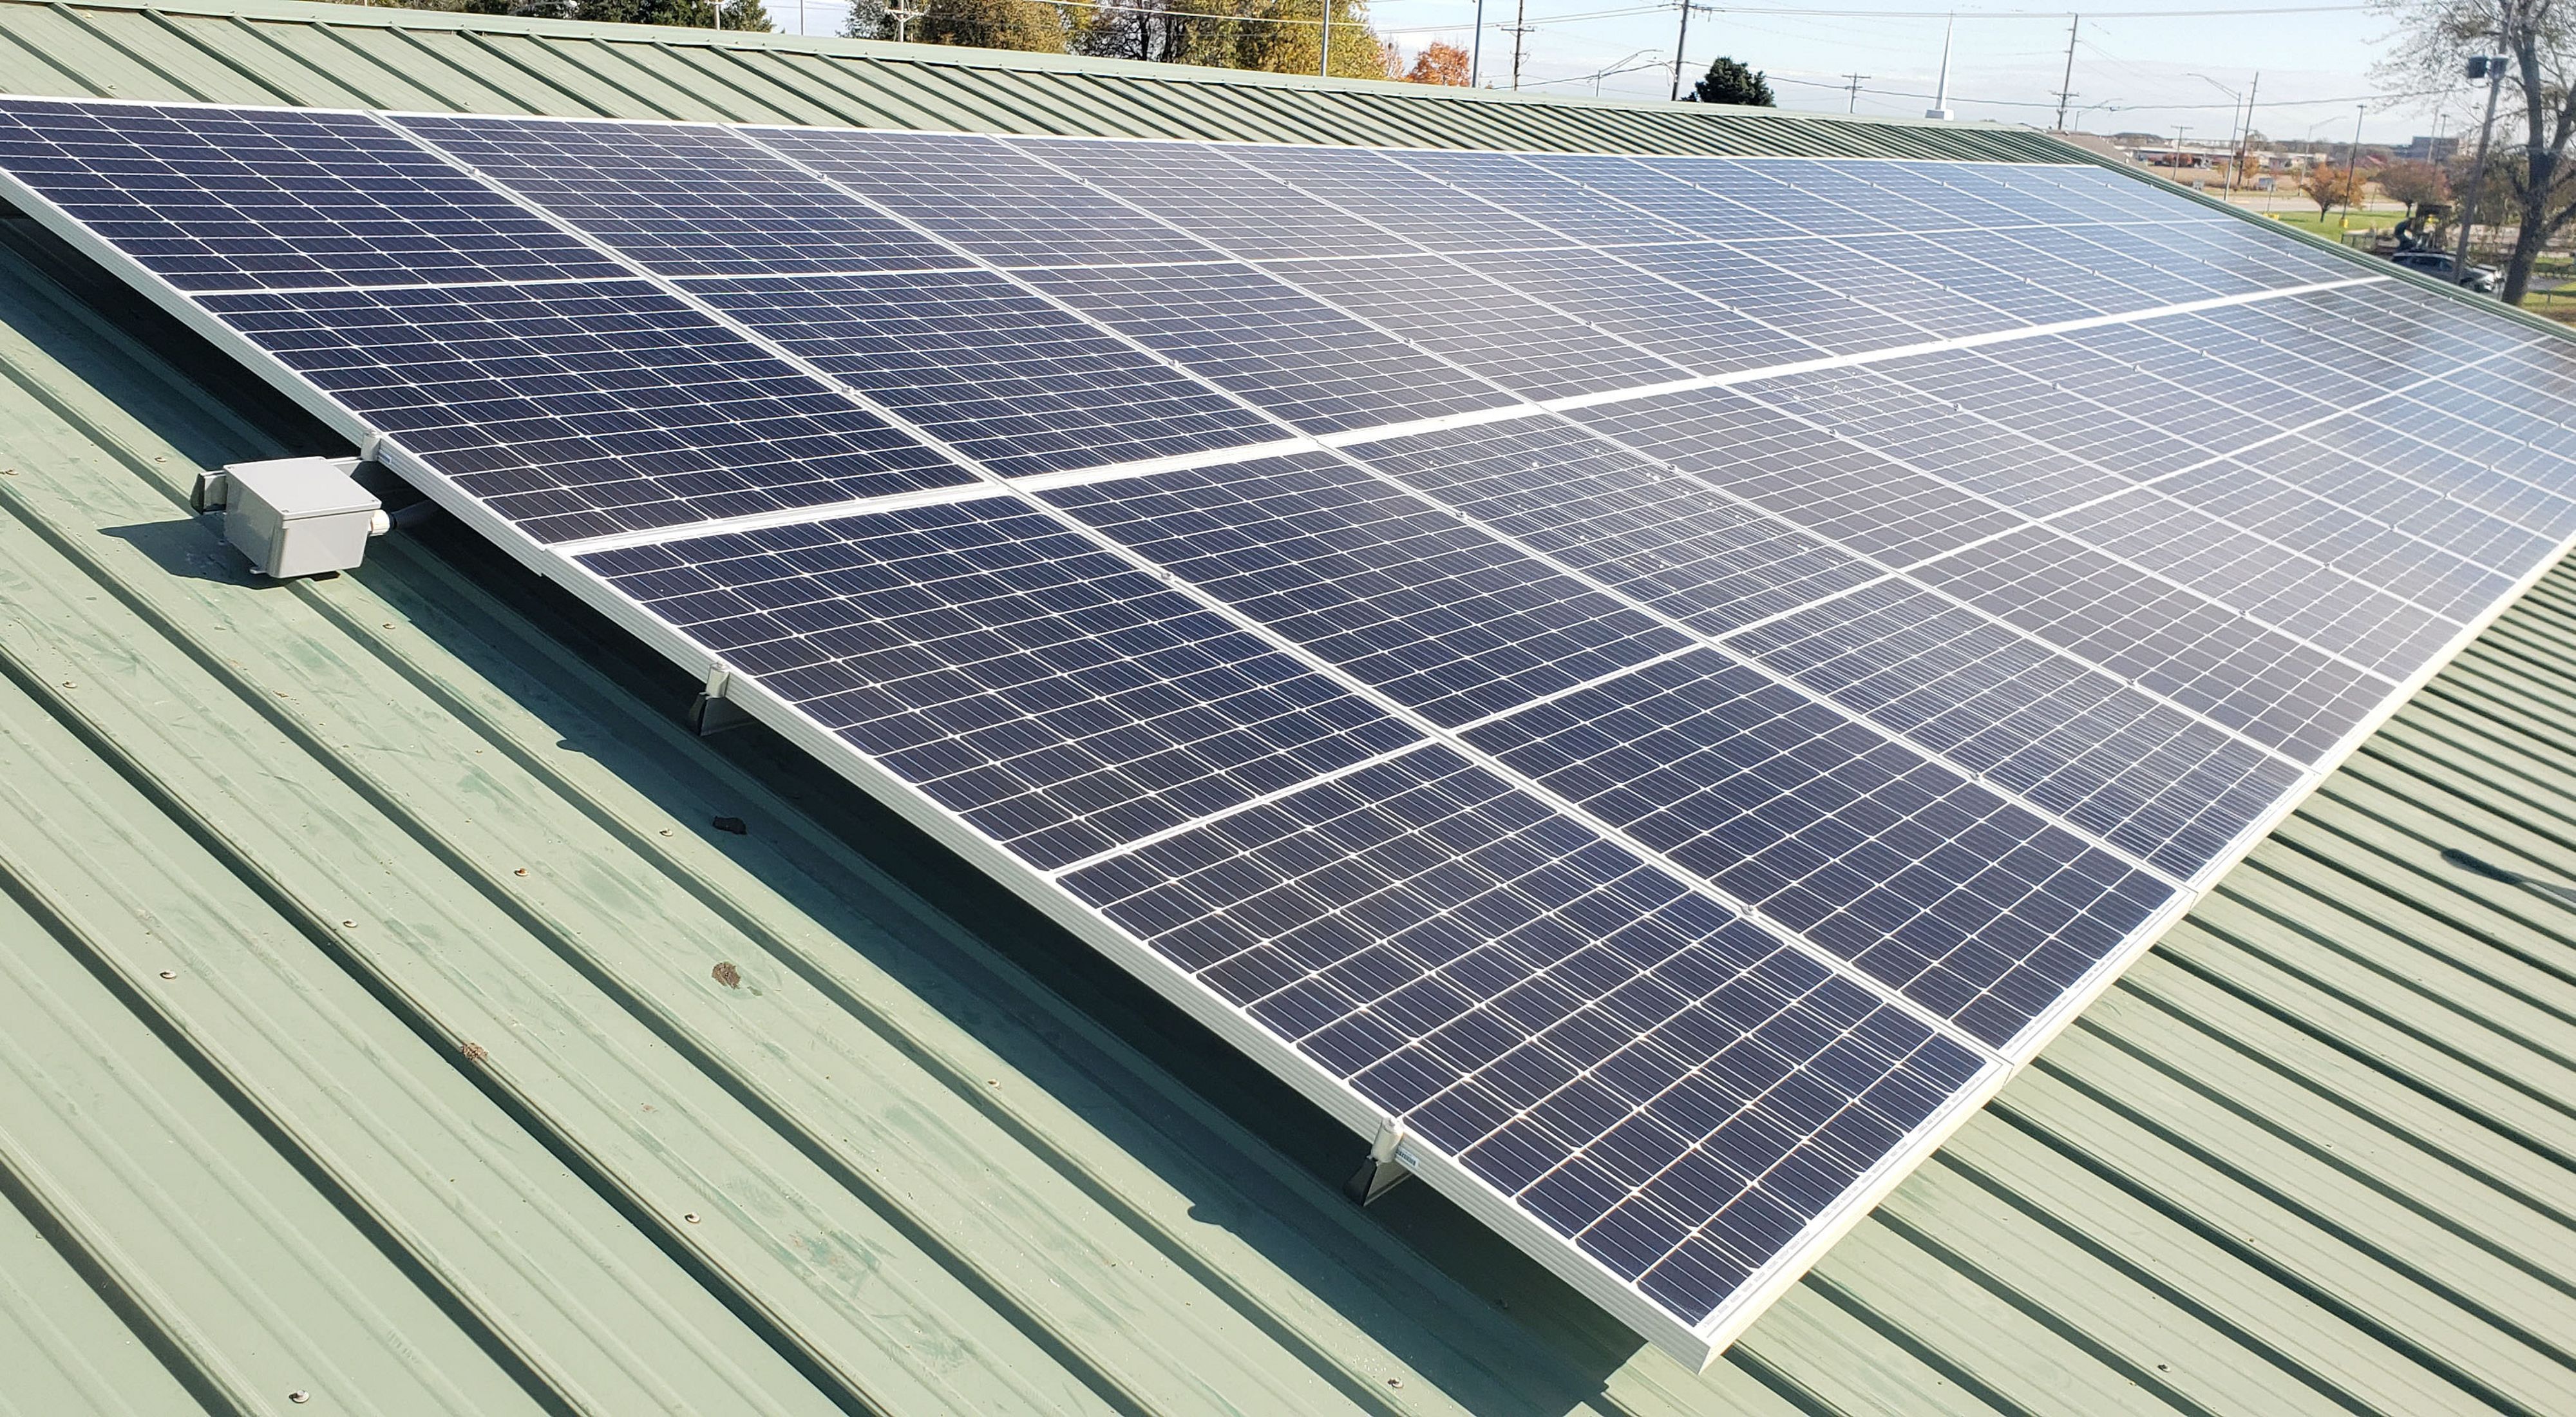 Photo of a rooftop solar installation in Iowa.